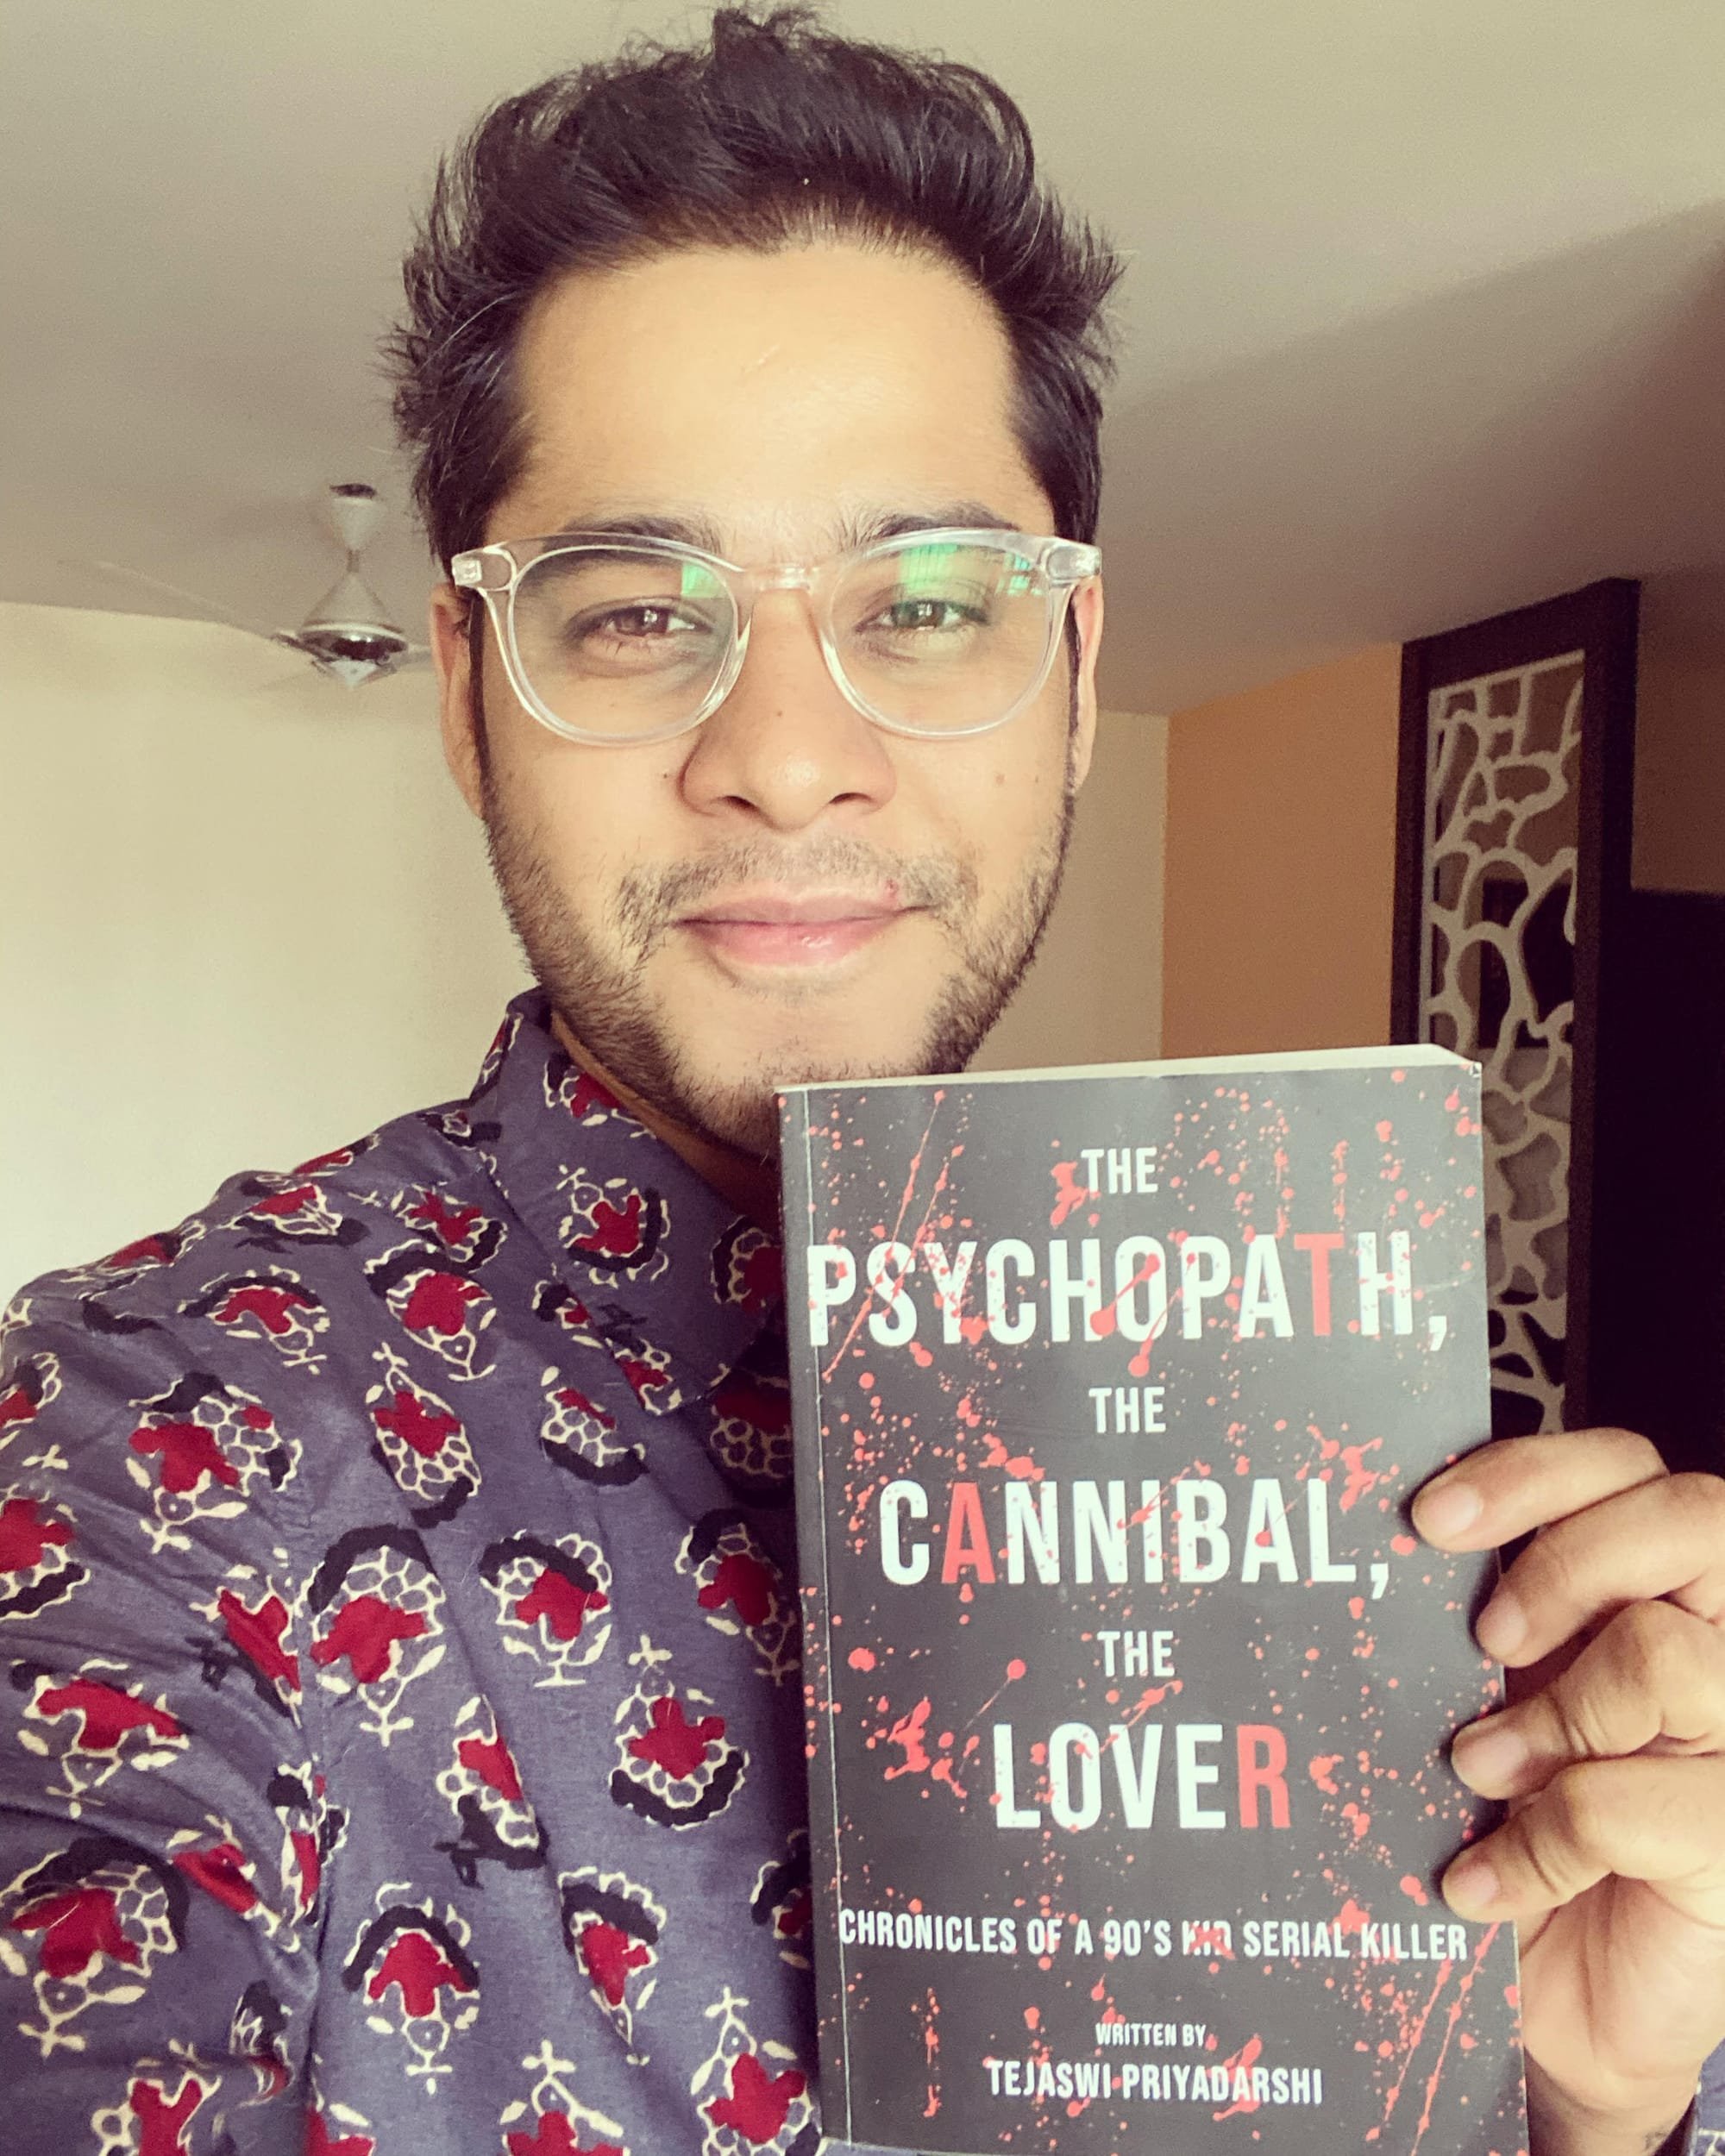 Delving into the Dark: An Interview with Splatter-Noir Author Tejaswi Priyadarshi